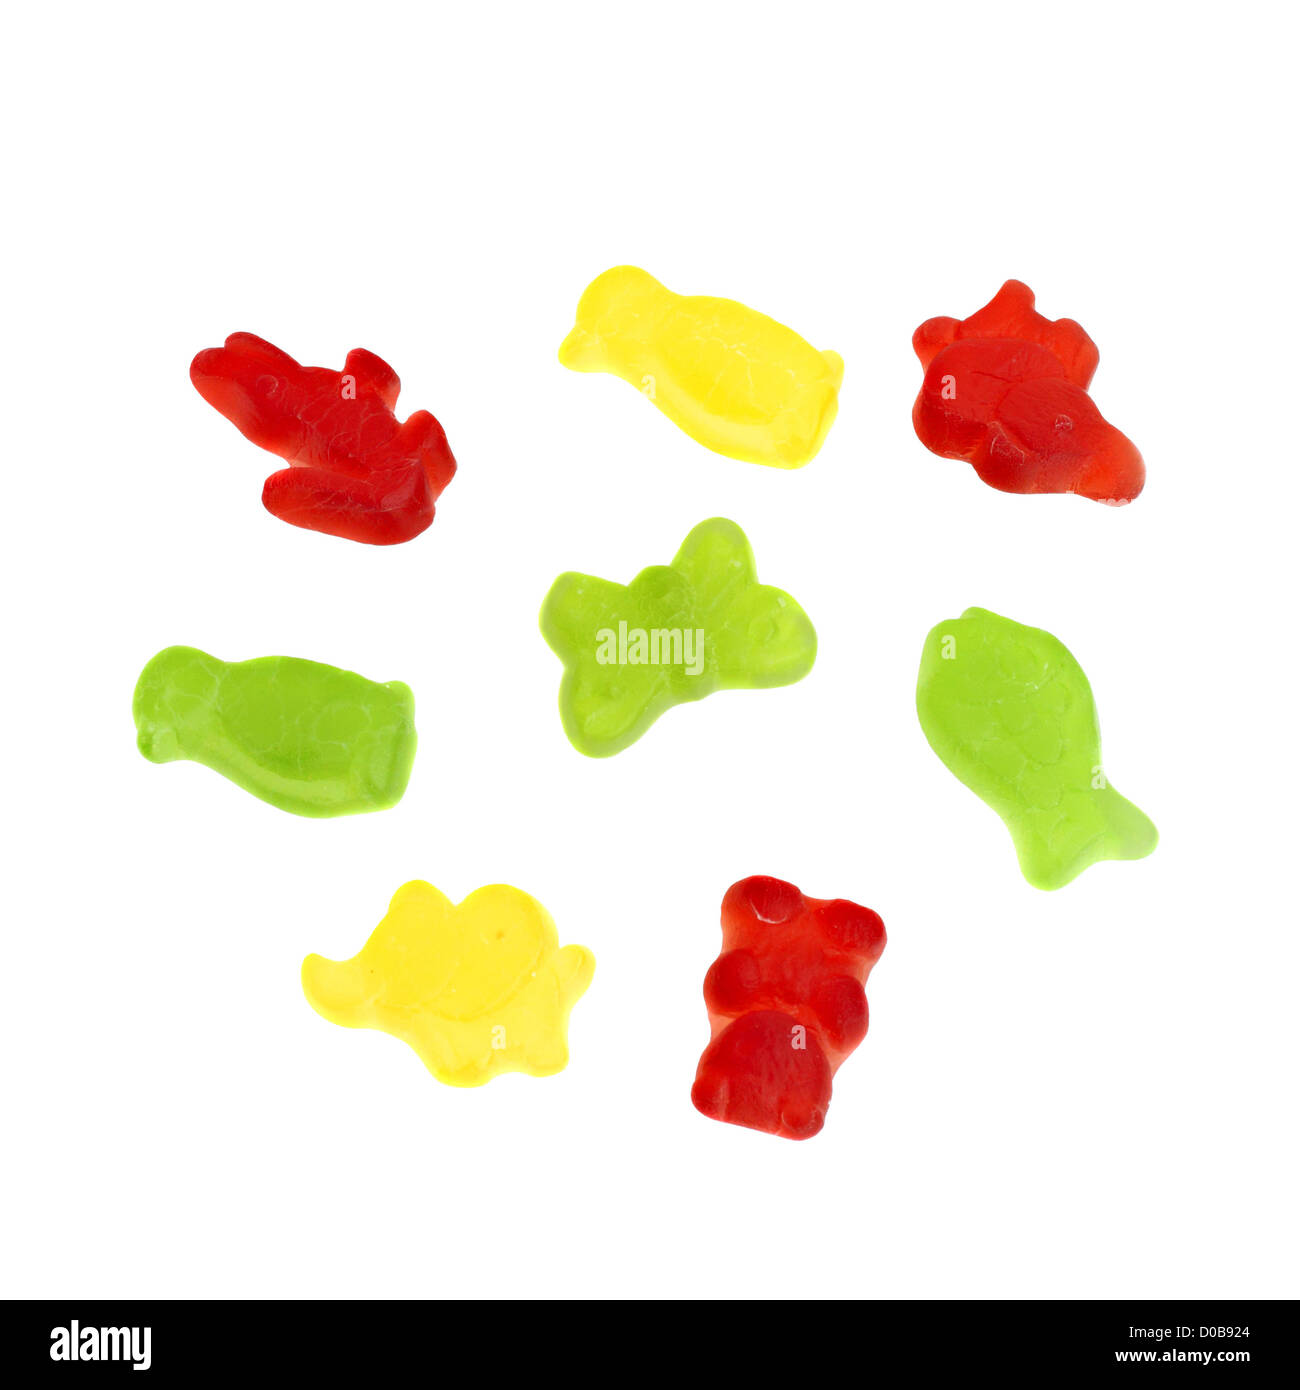 Multicolored jelly candies set isolated on white background Stock Photo